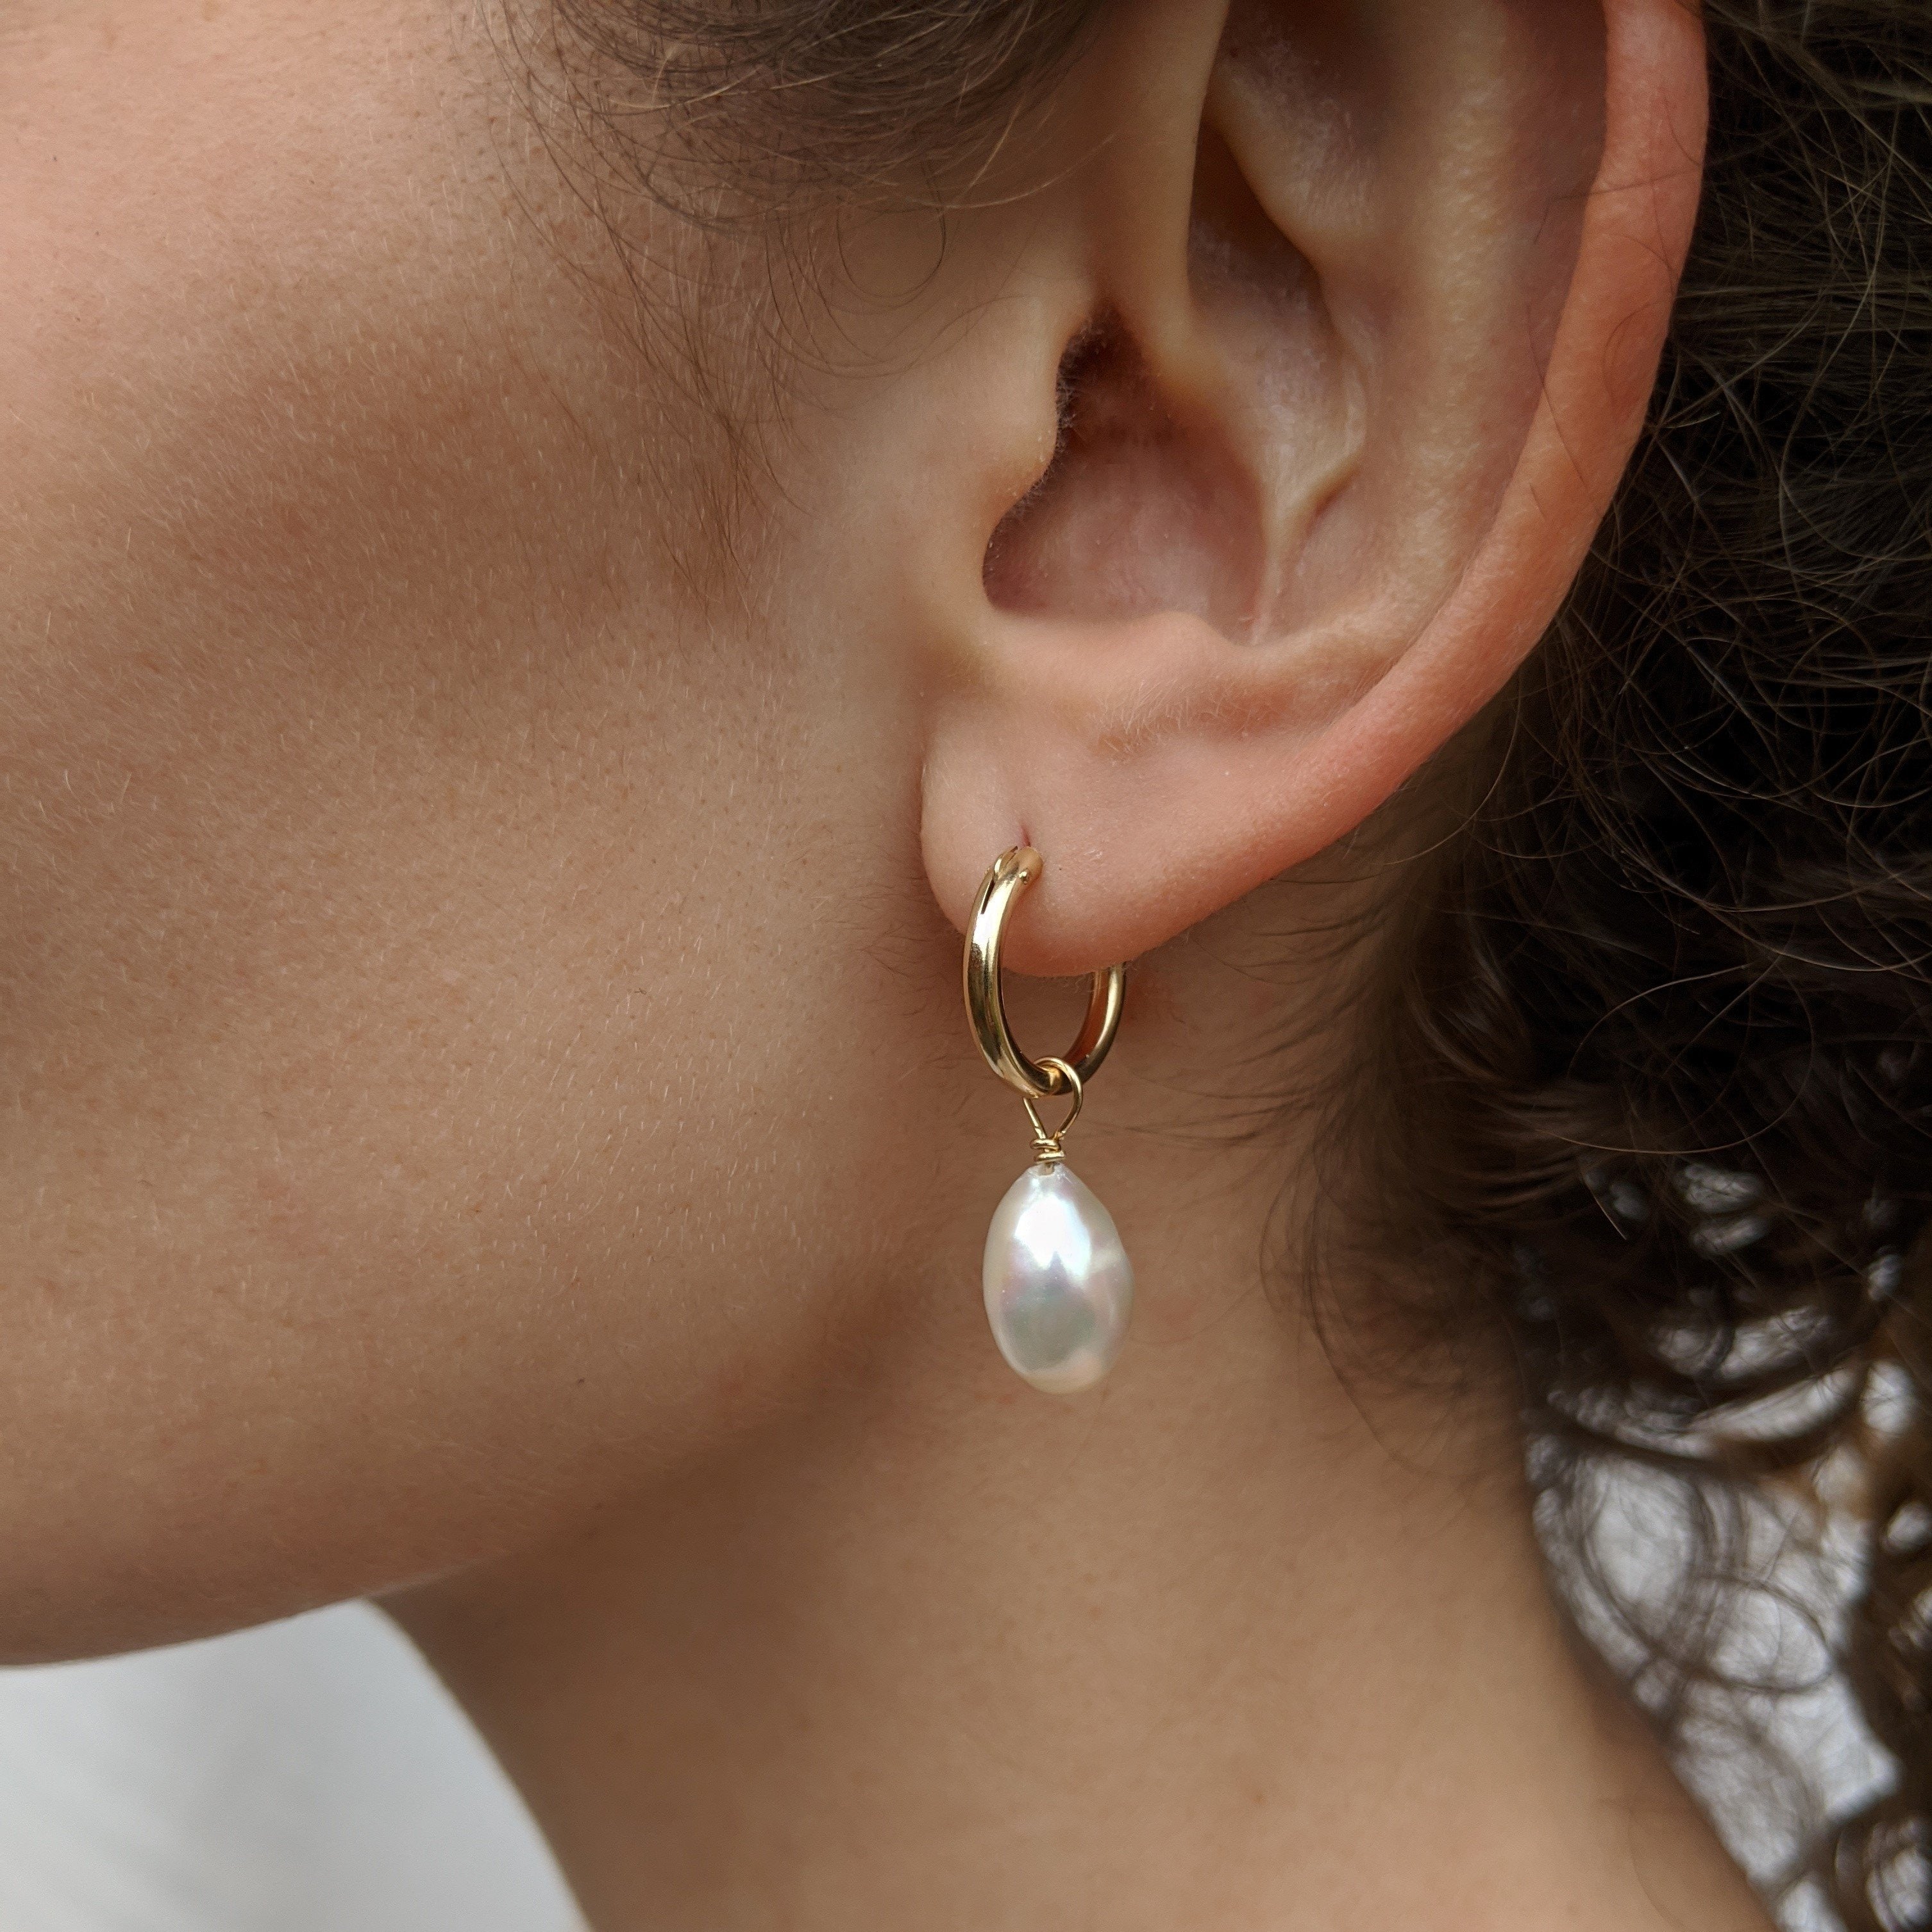 Close up of ear with a gold hoop earring with pearl